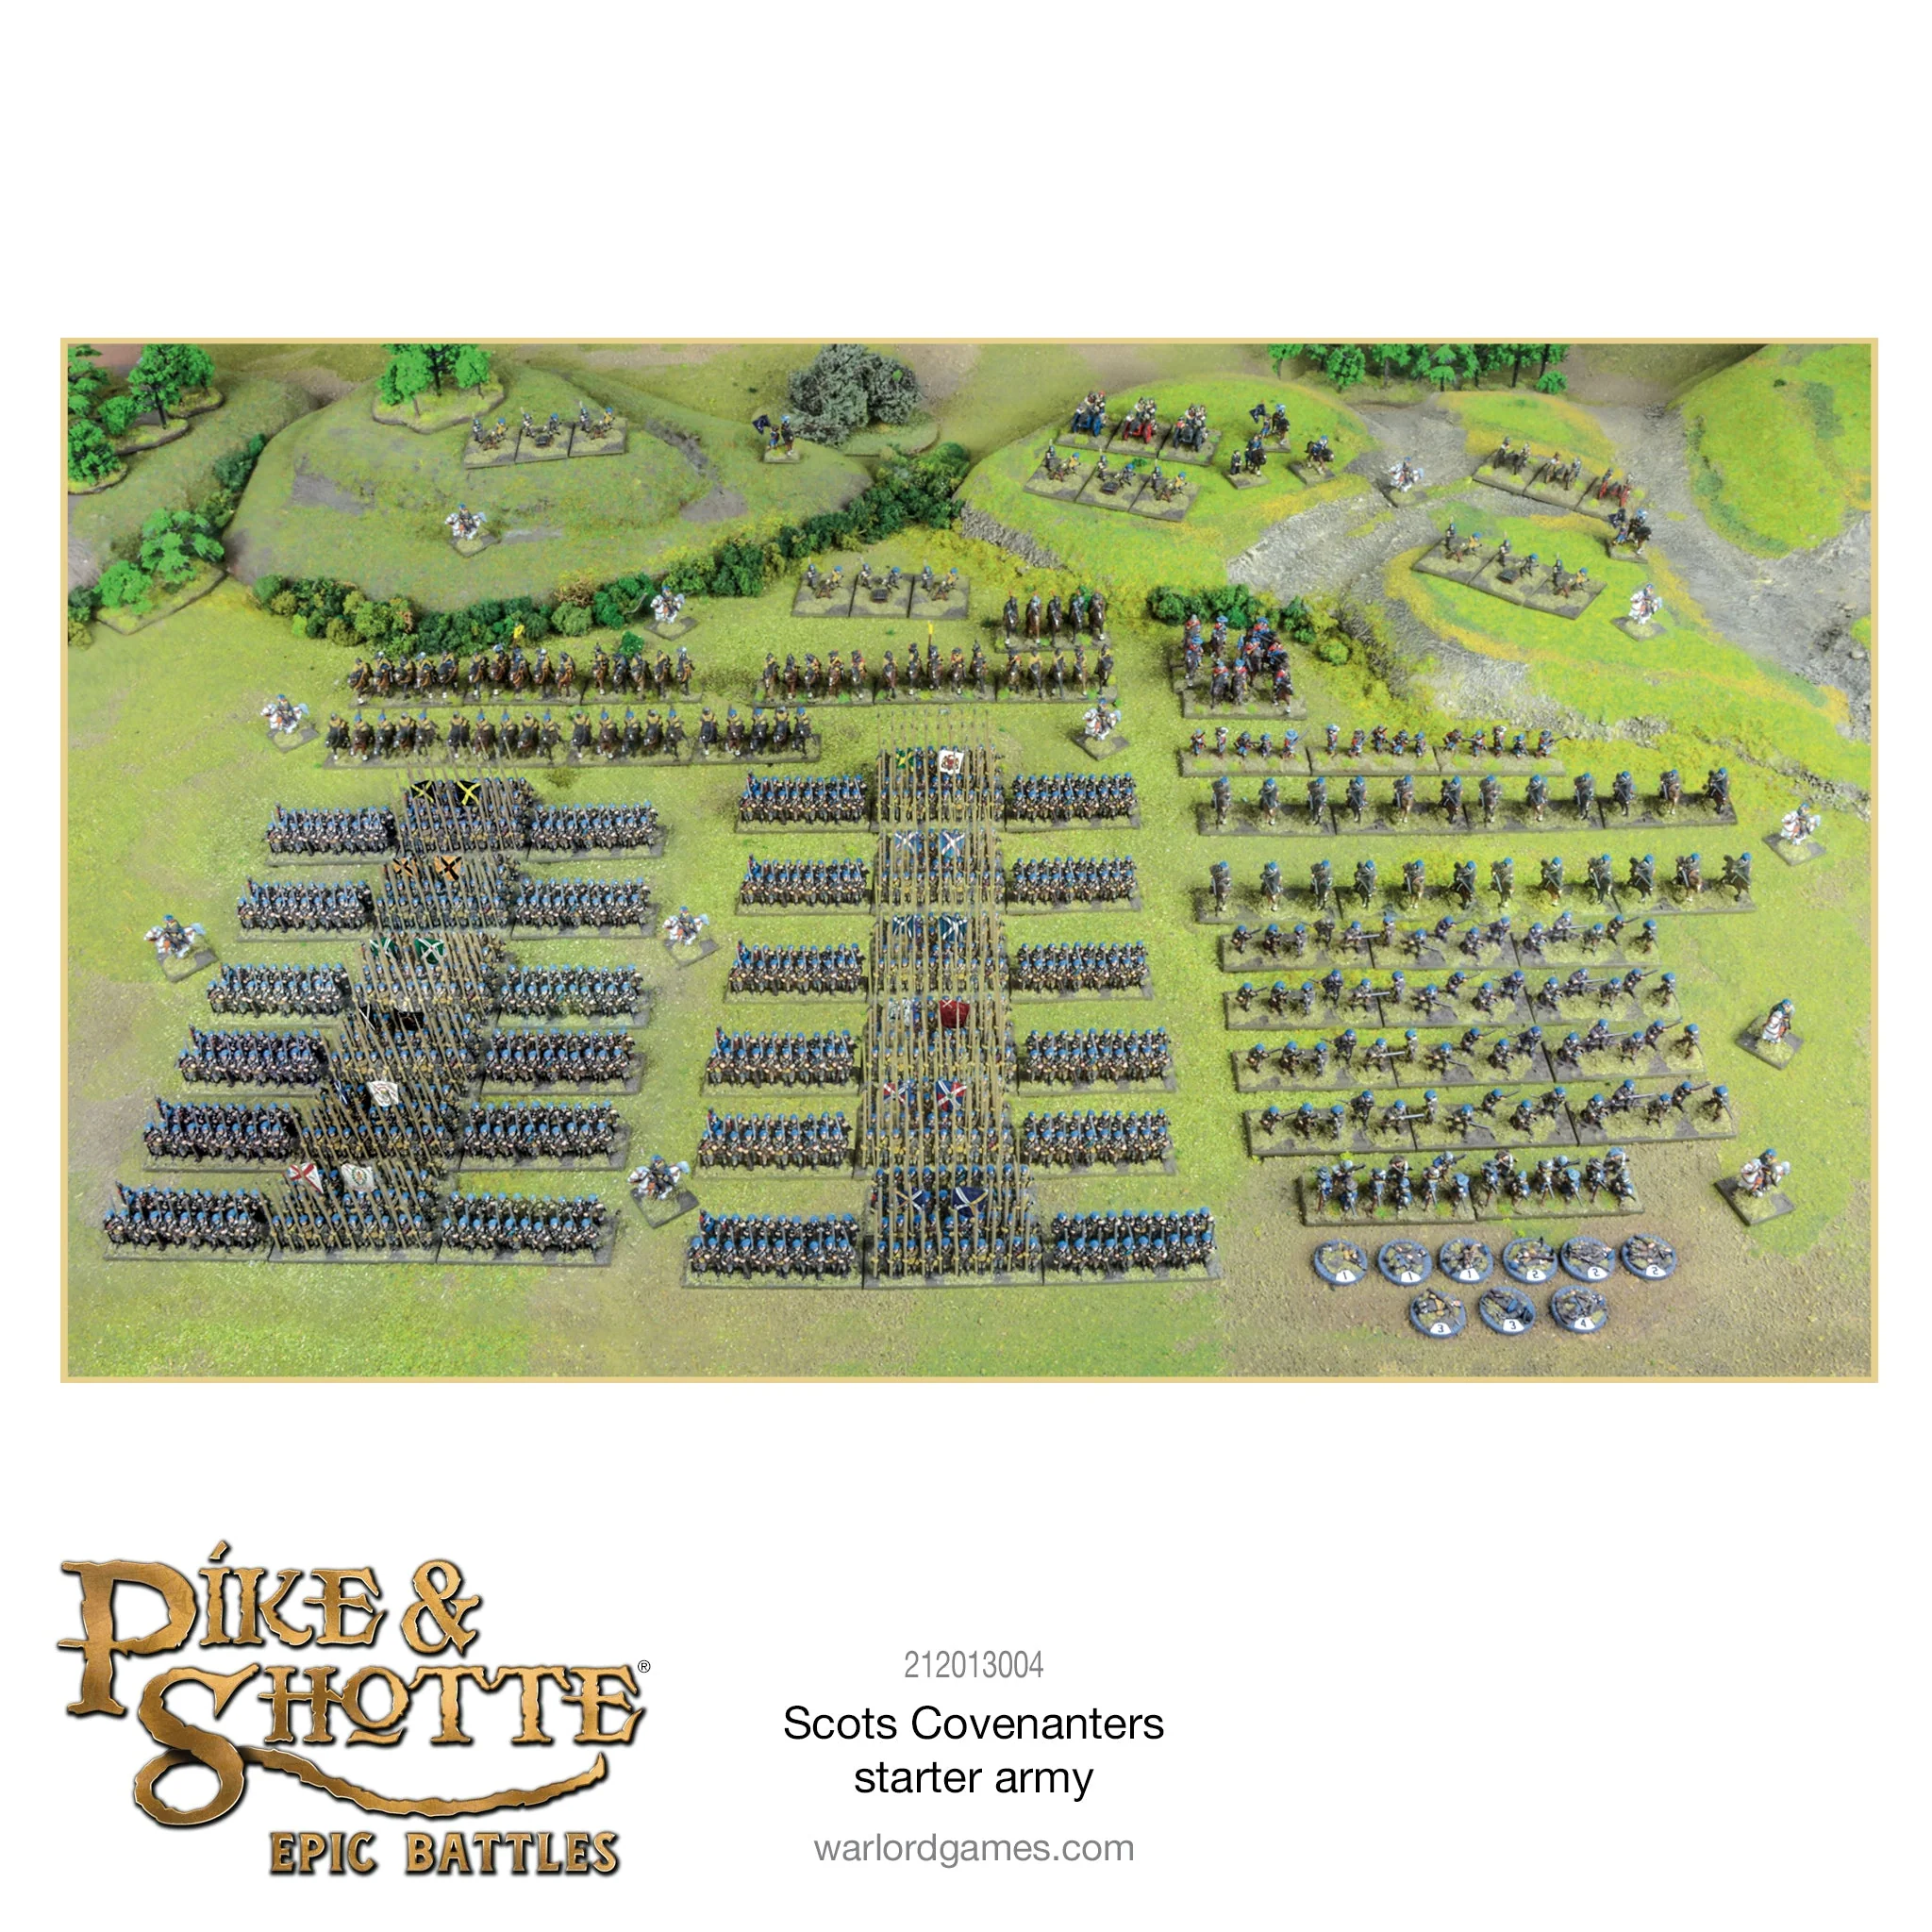 Pike & Shotte: Epic Battles: Scots Covenanters Starter Army 